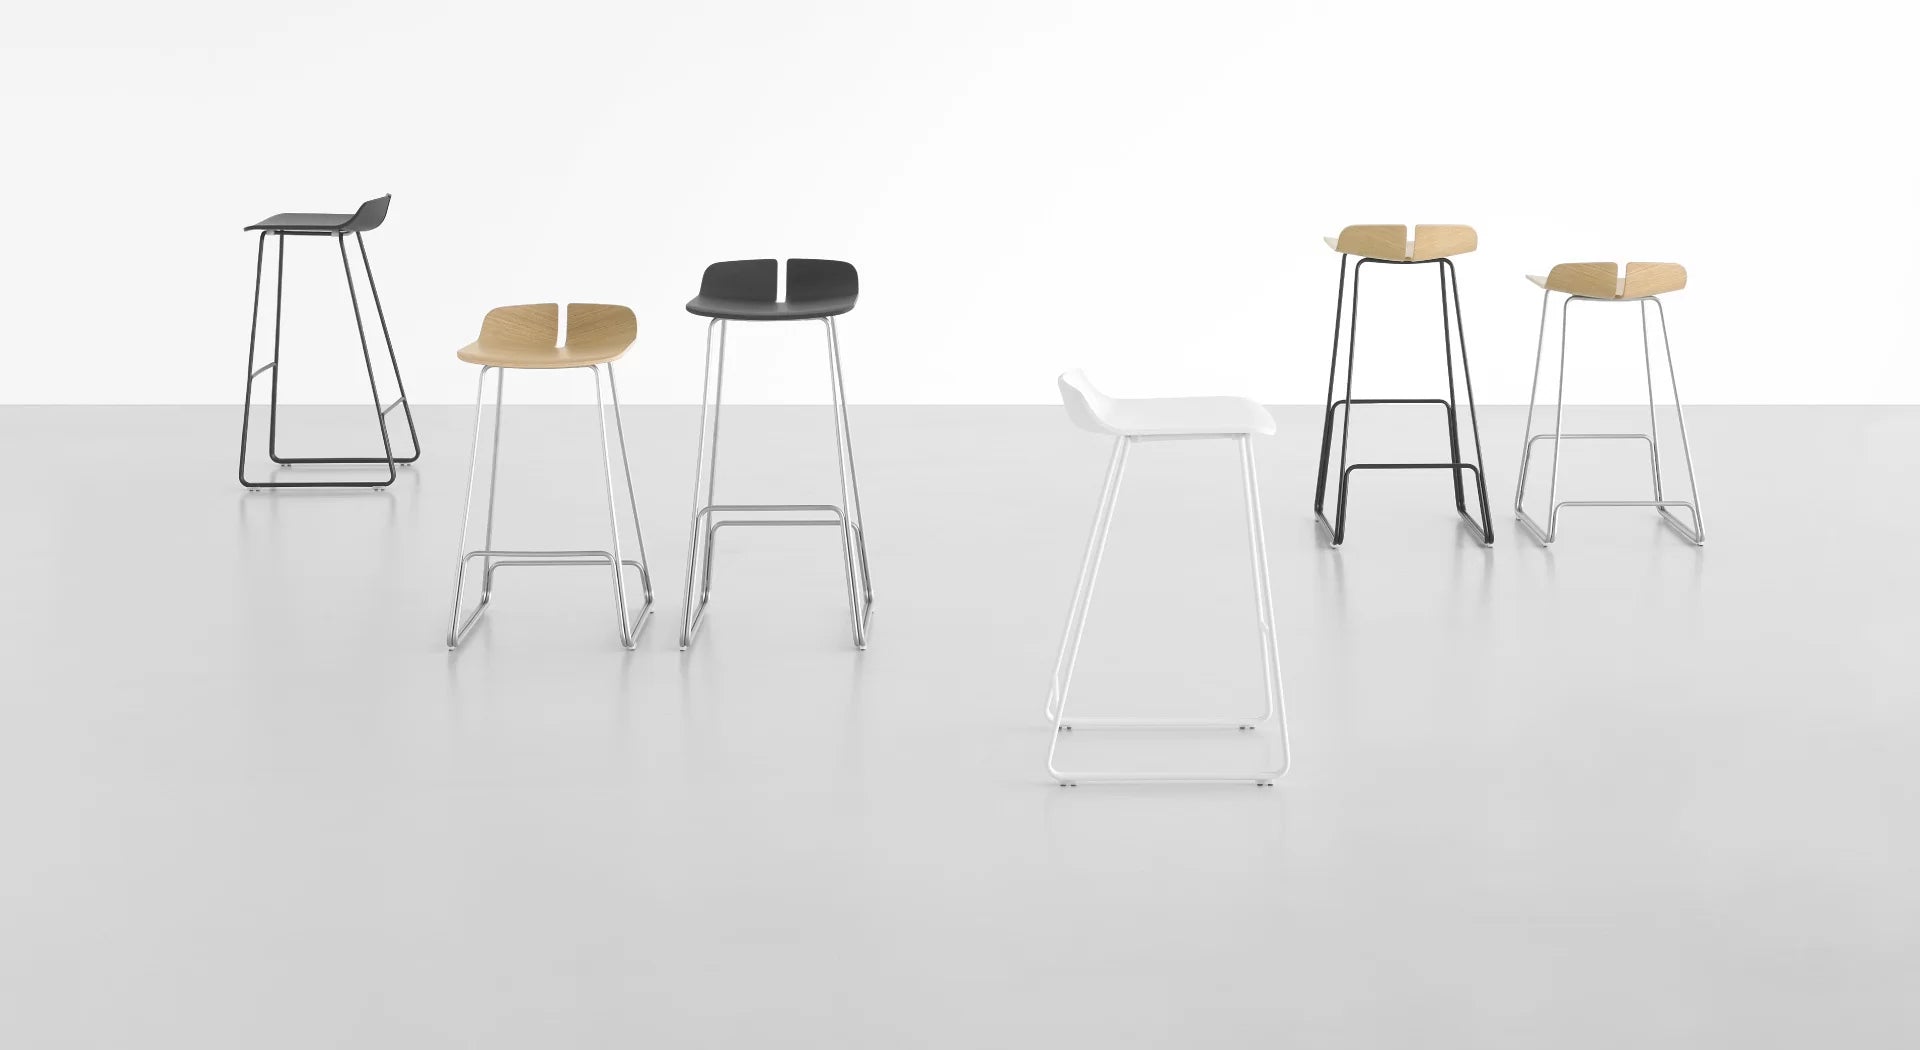 The Lapalma Bar Stool Collection Transforms Kitchens, Offices, and Bars